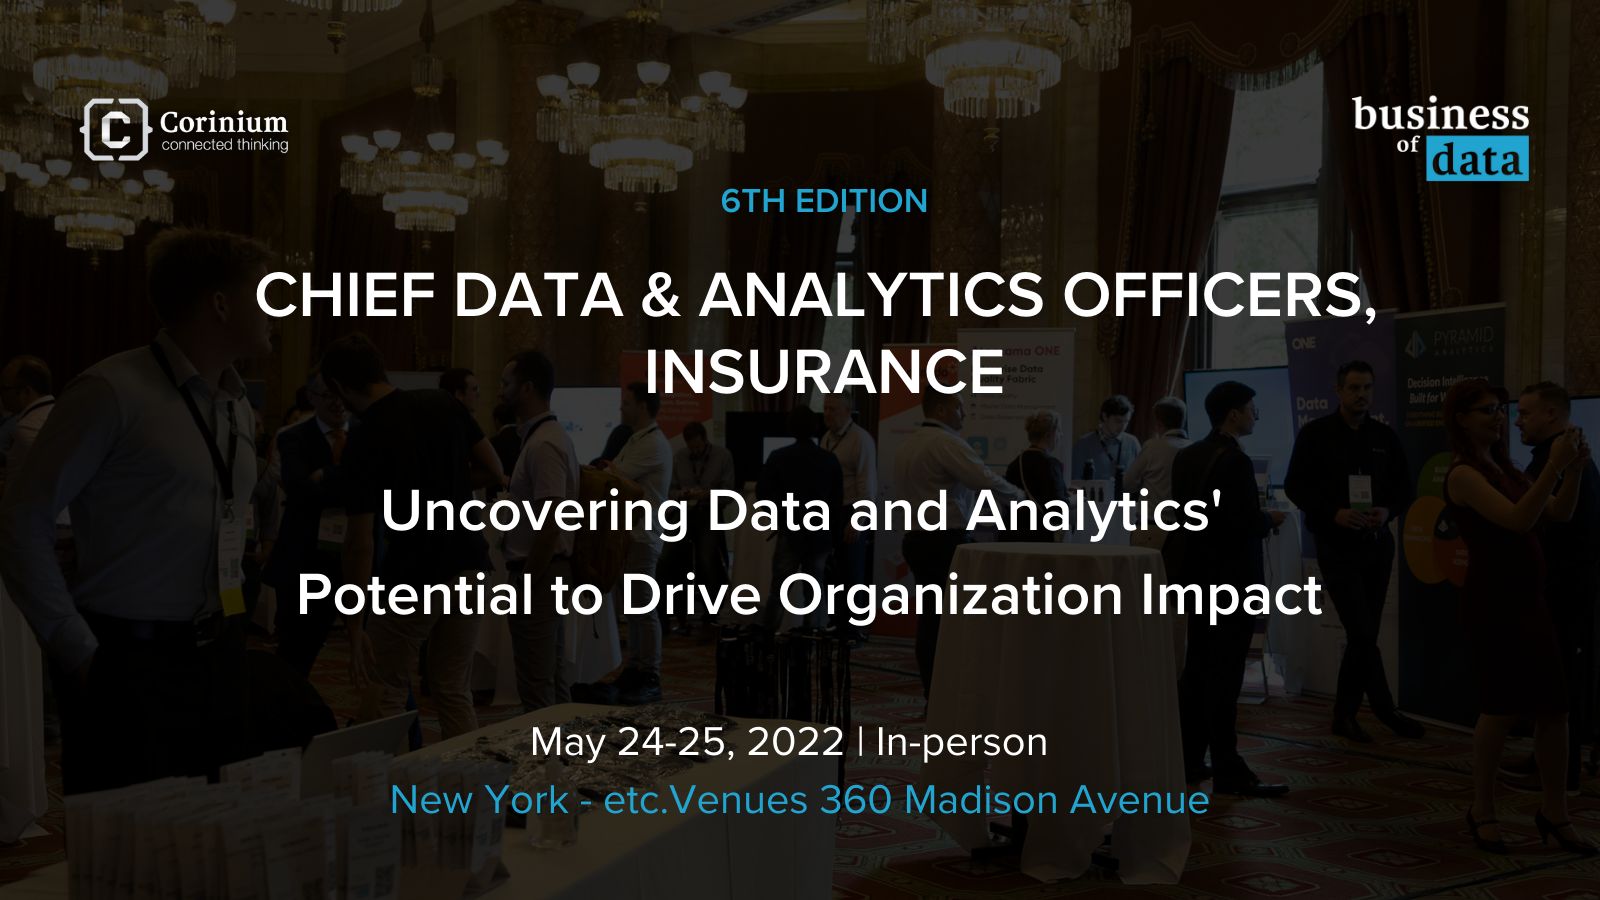 Chief Data and Analytics Officers, Insurance 2022